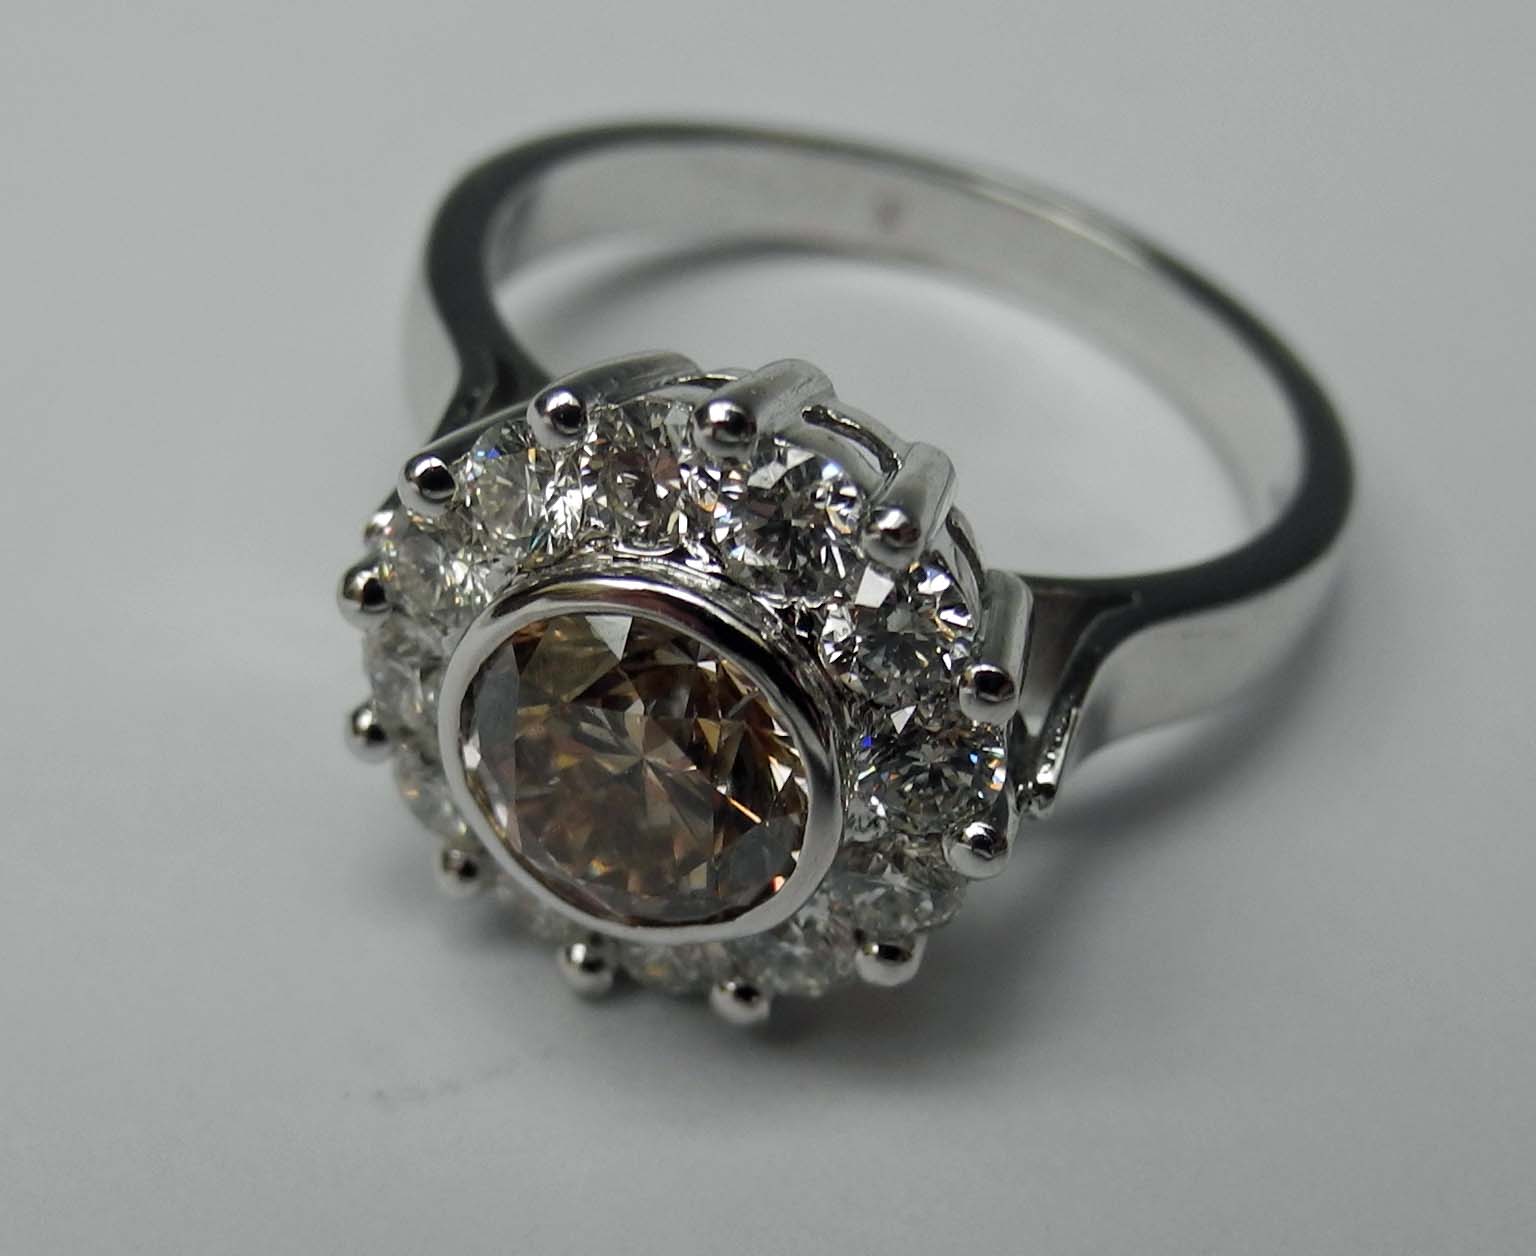 An 18ct white gold and champagne diamond cluster ring (diamond weight to centre stone 1.52).